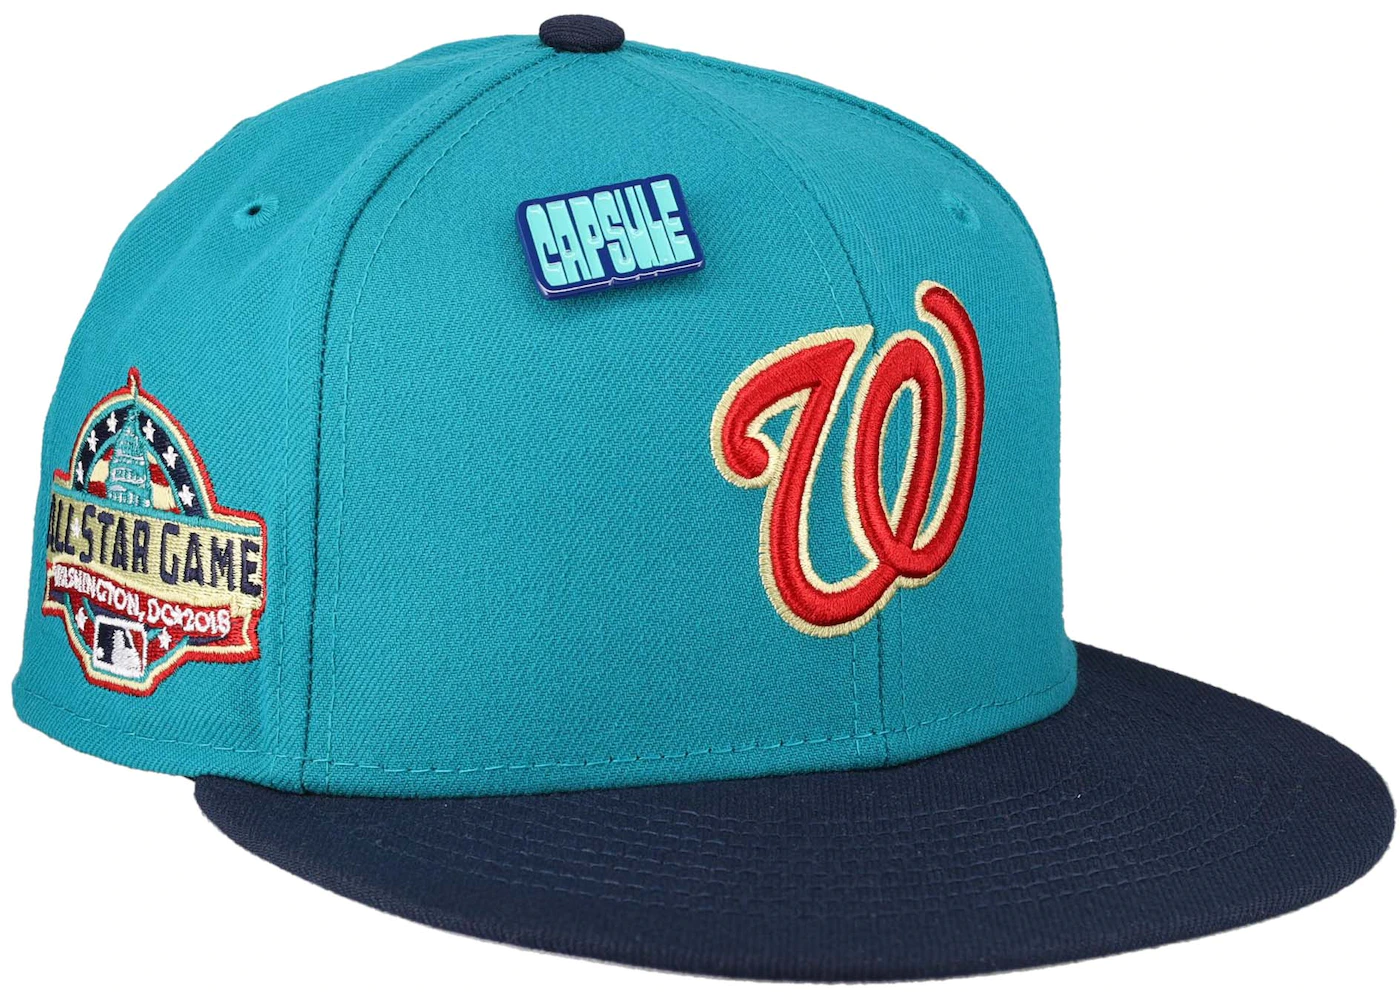 WASHINGTON NATIONALS 2018 ALL STAR GAME PURPLE ICY BRIM NEW ERA FITTED HAT  7 5/8